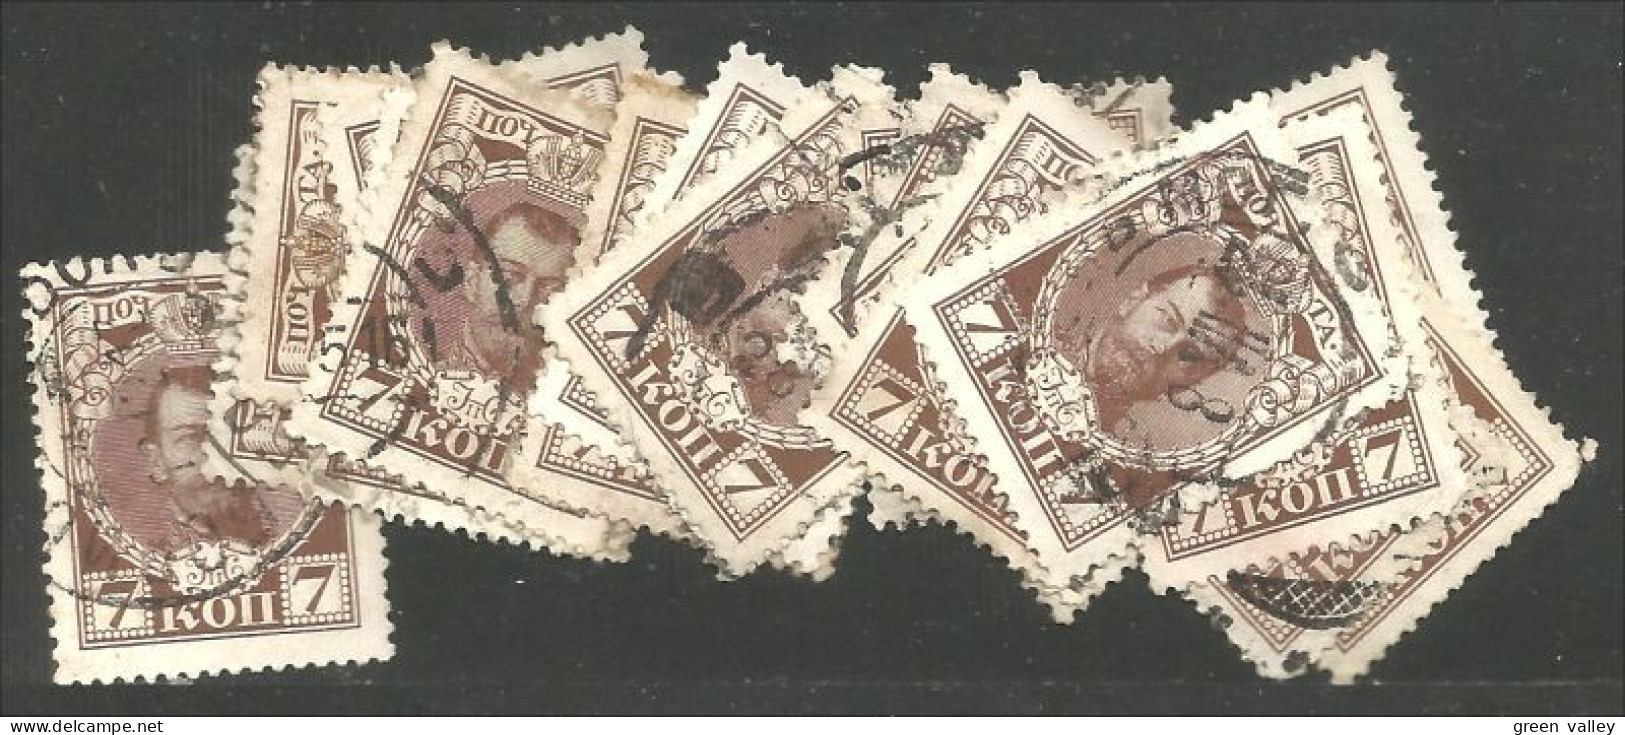 771 Russie 7k Brown 1913 18 Stamps For Study Tsar Tzar Nicholas II (RUZ-367) - Used Stamps